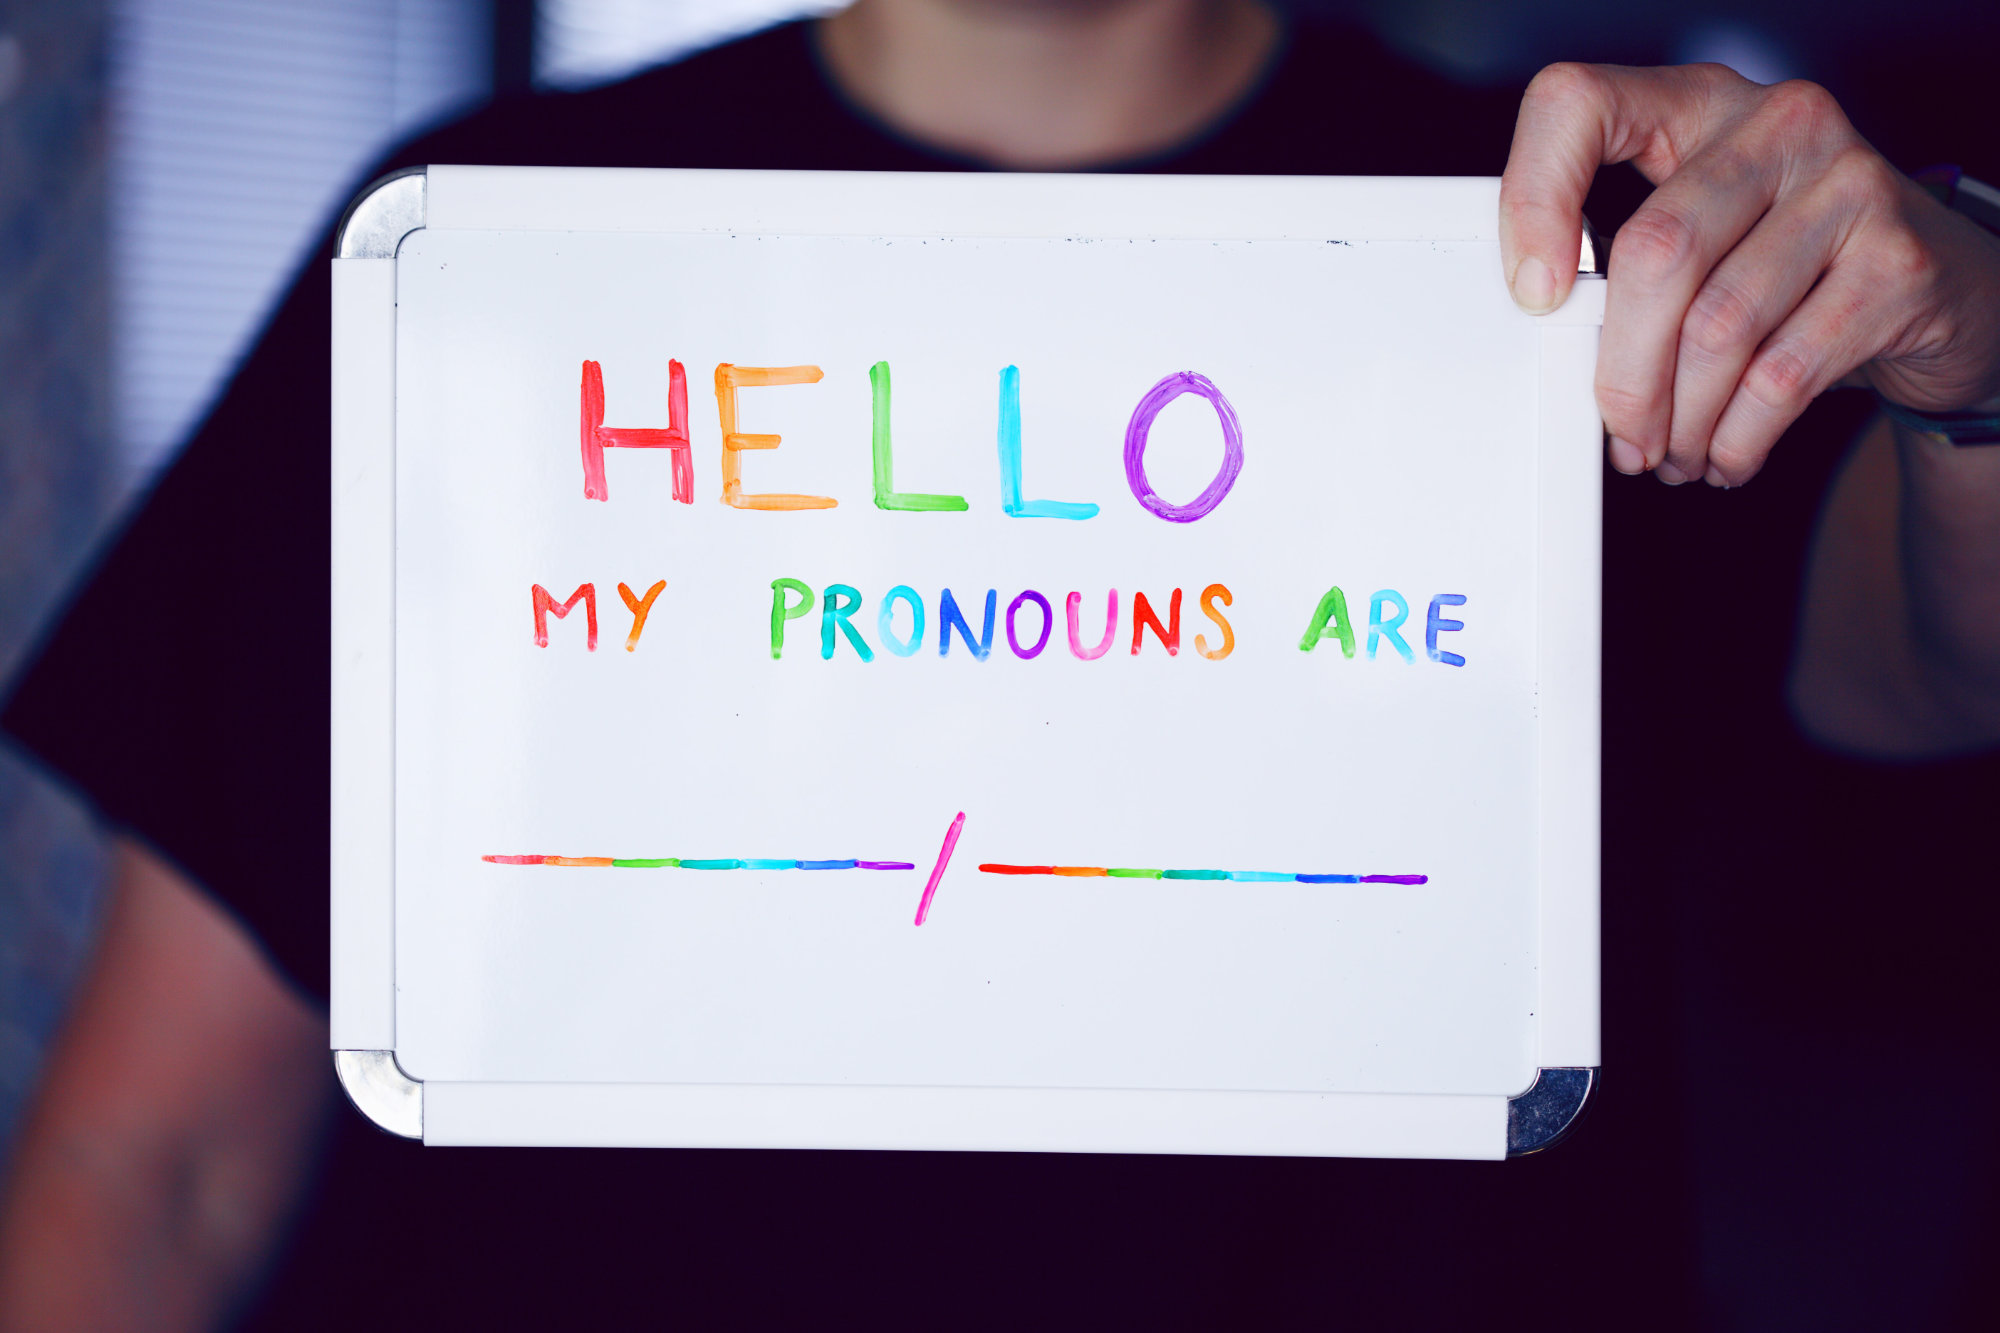 A person holds a whiteboard sign that reads, "Hello my pronouns are..."